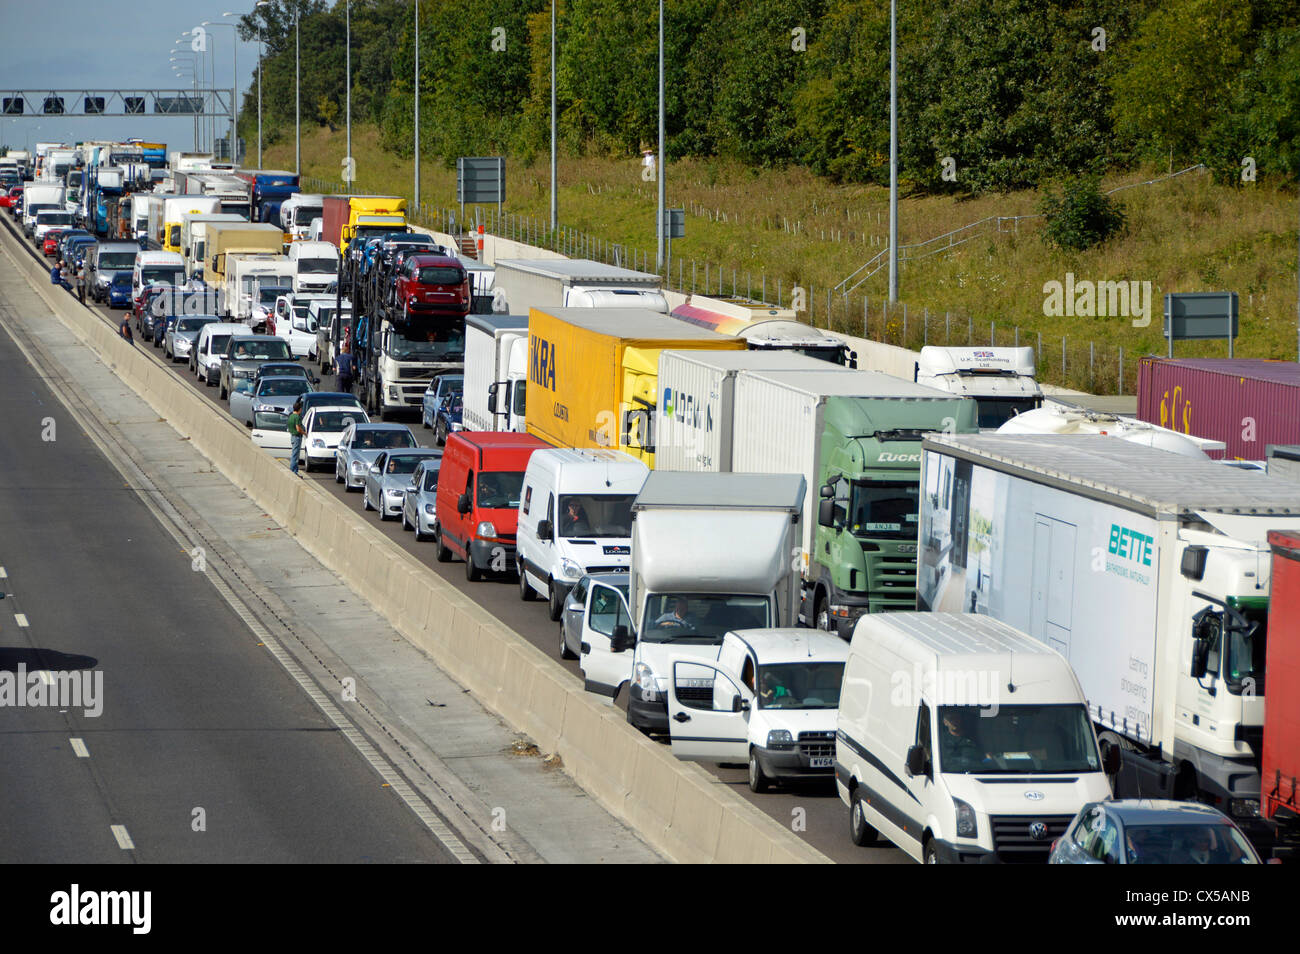 Stationary traffic gridlocked on four lanes of M25 motorway Stock Photo